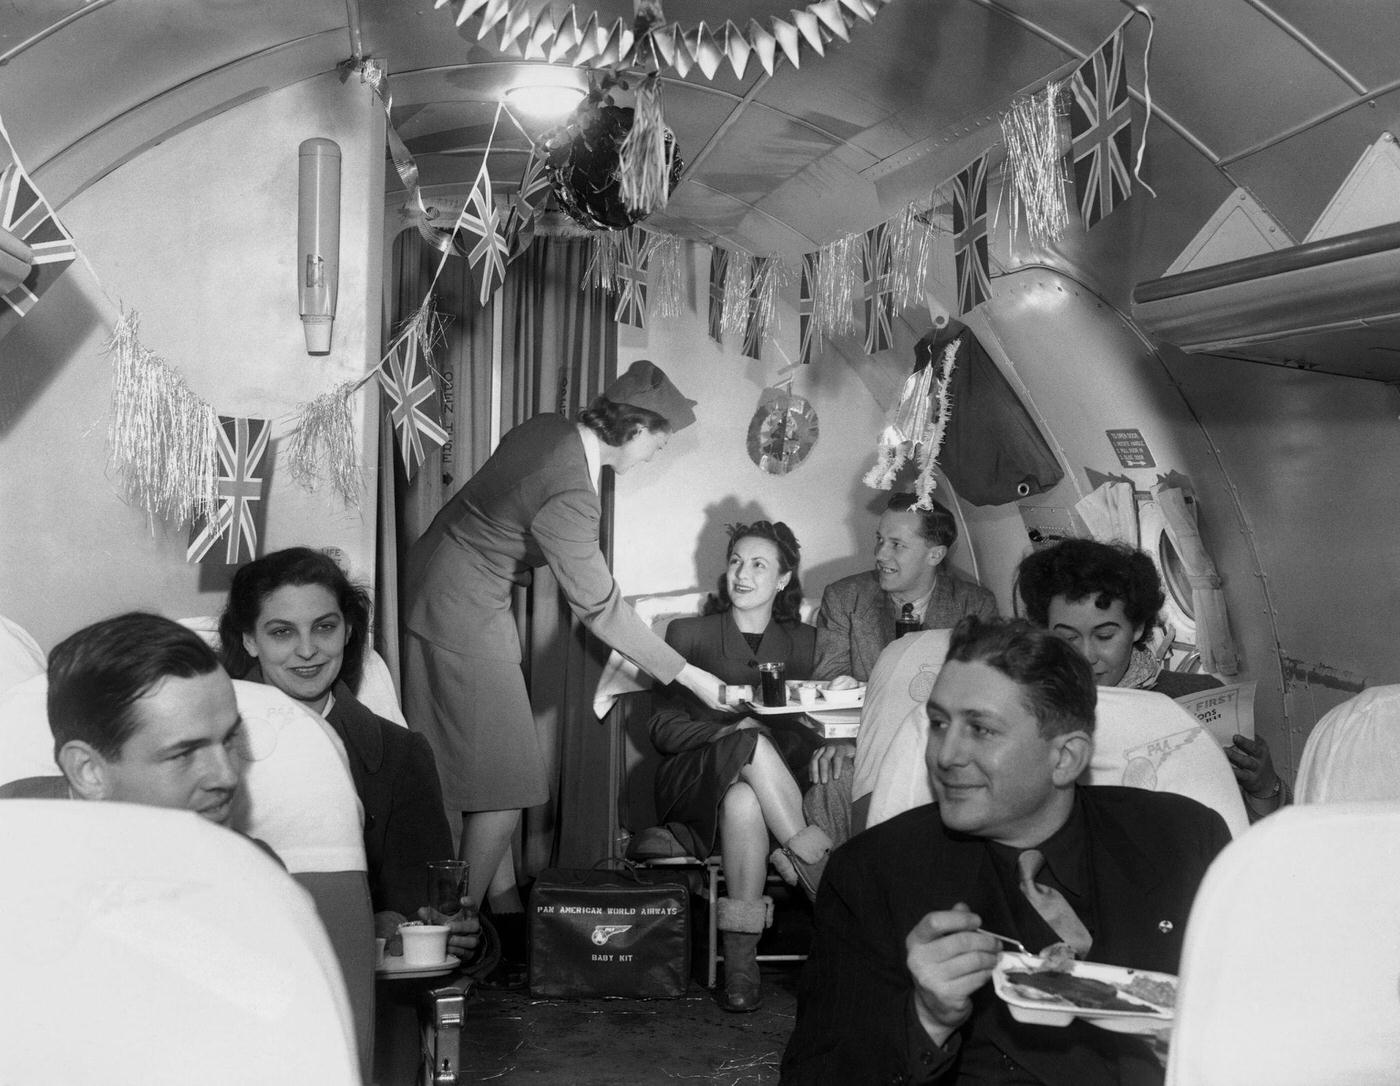 Air hostess Patricia Pelley is serving an in-flight meal to passengers traveling across the Atlantic on board a festively decorated, Pan-American aeroplane.